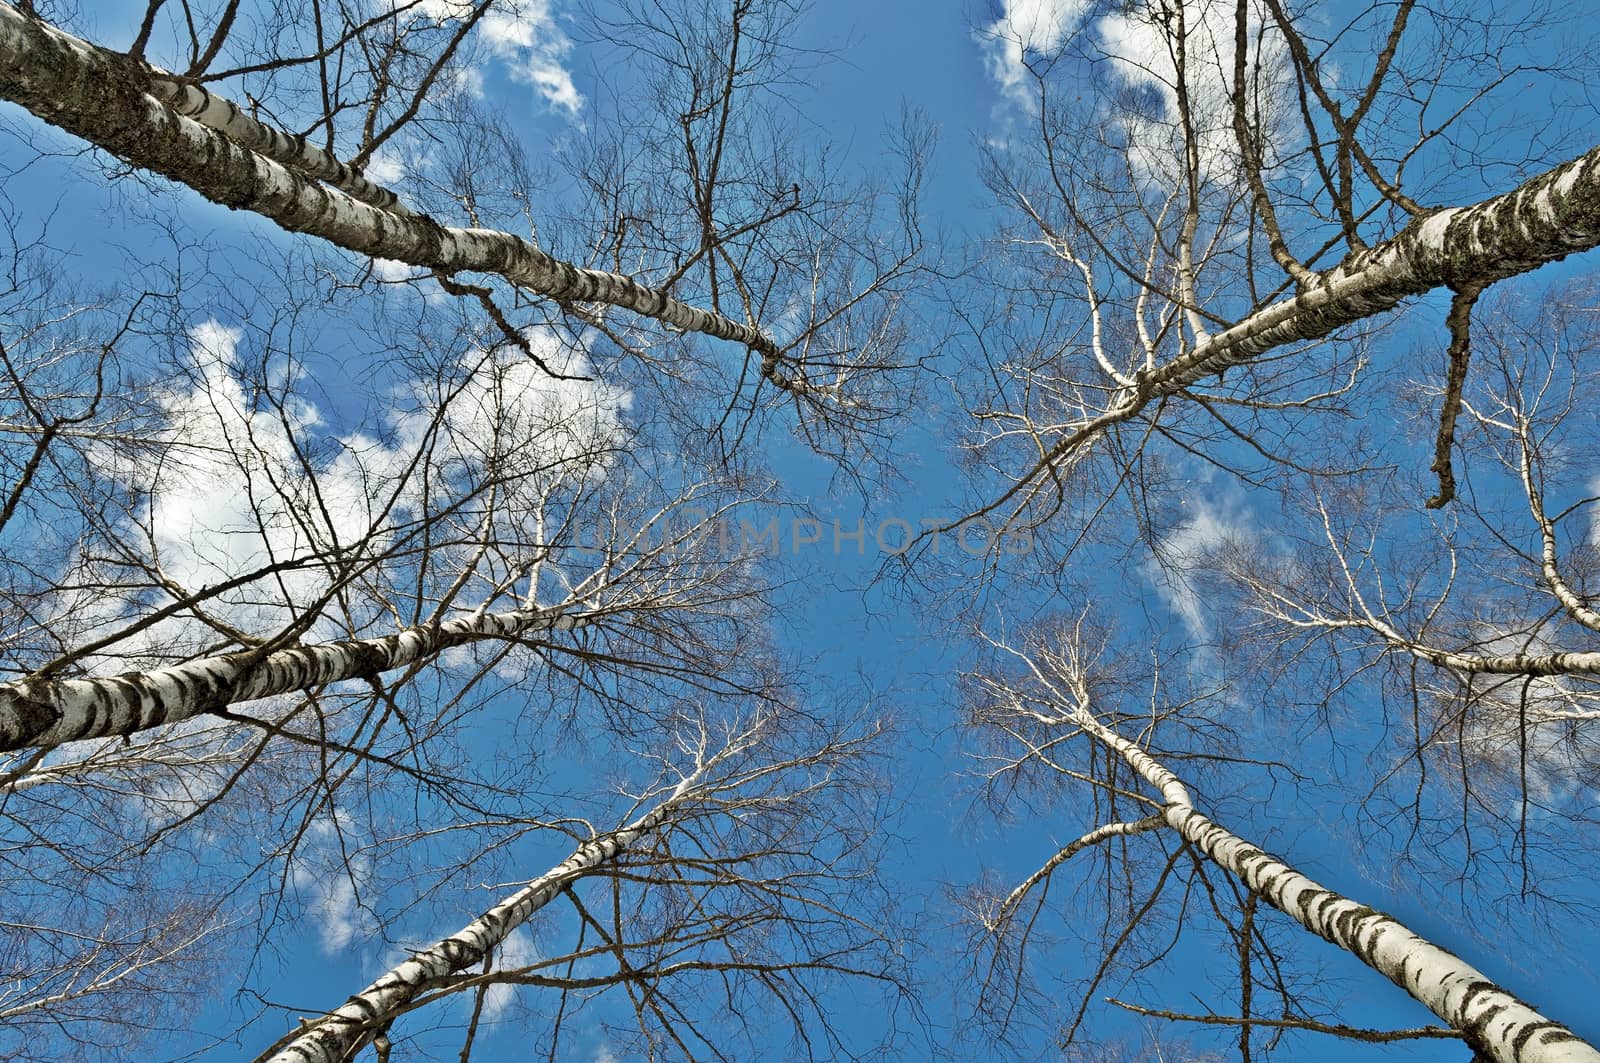 Top of bare birch trees by wander